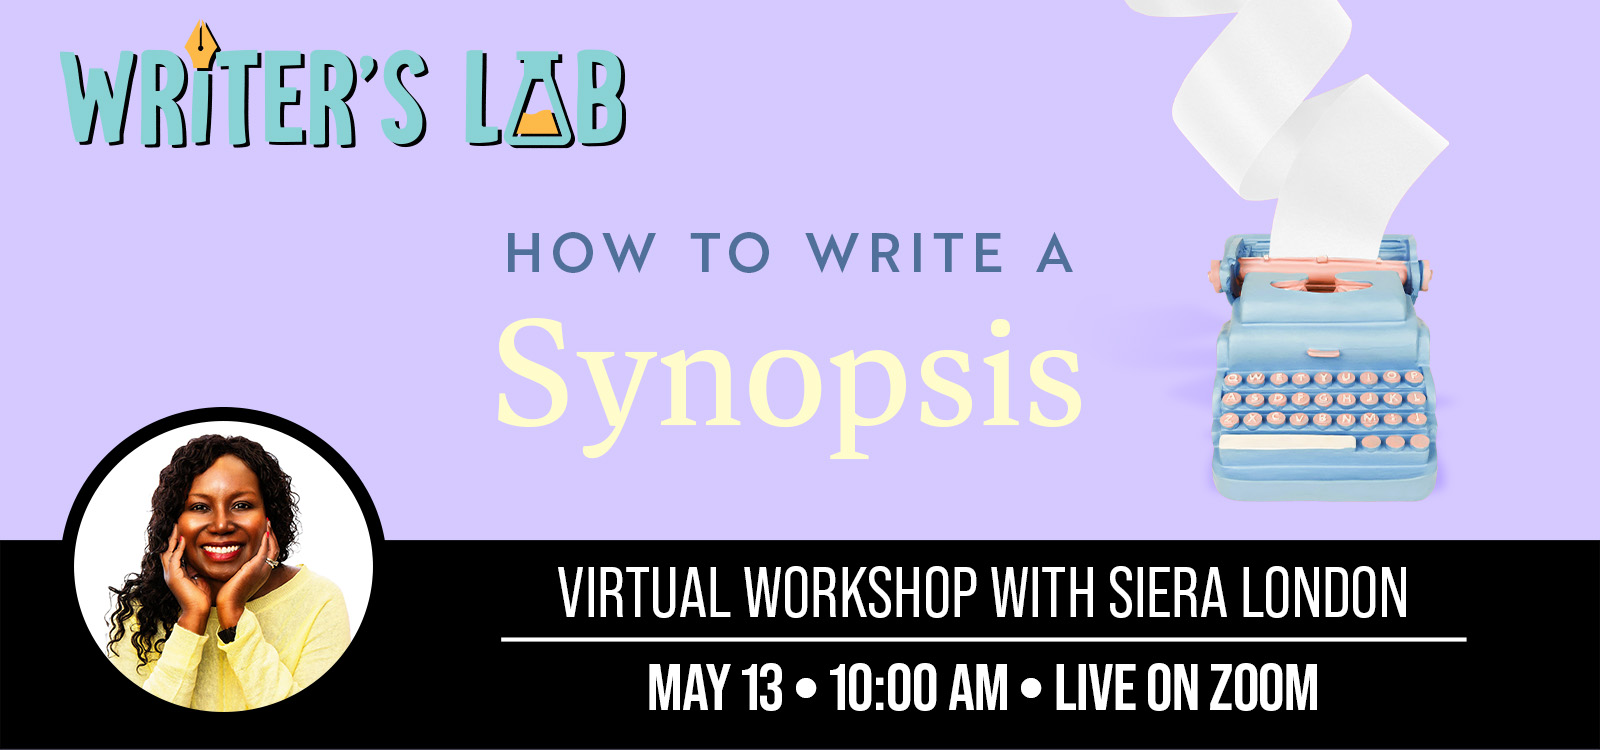 How to Write a Synopsis Writer's Lab